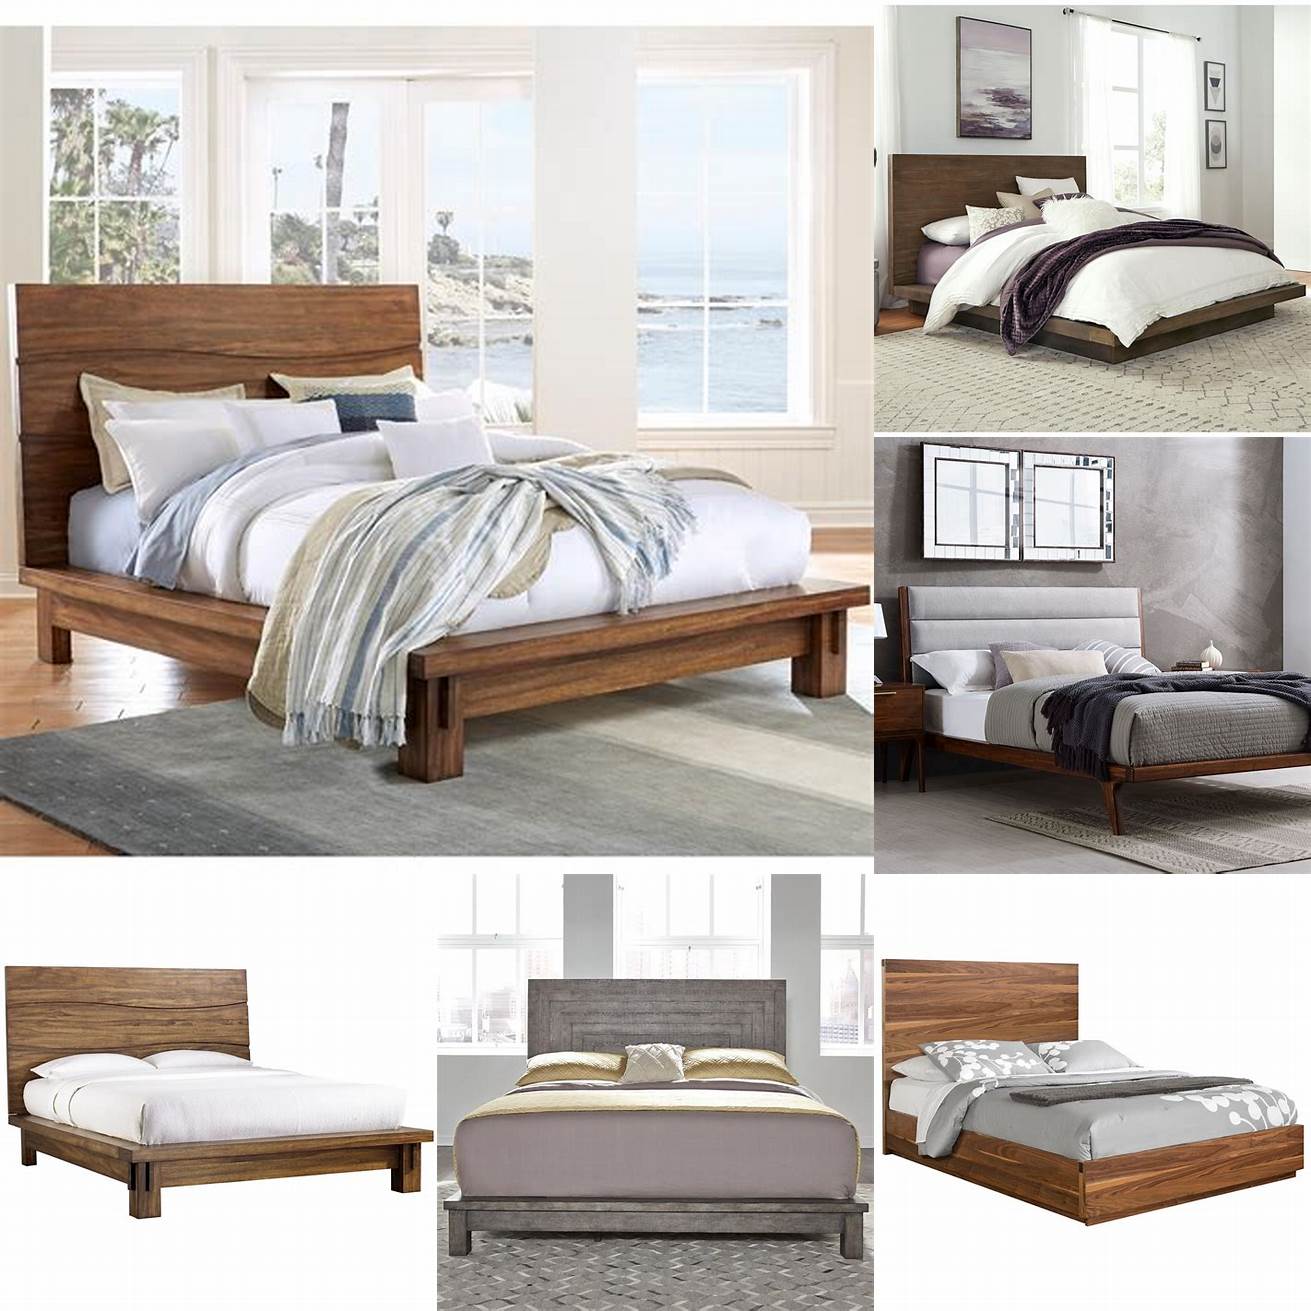 Platform California King Bed This type of bed has a low profile design and does not require a box spring It is perfect for people who prefer a modern or minimalist look in their bedroom